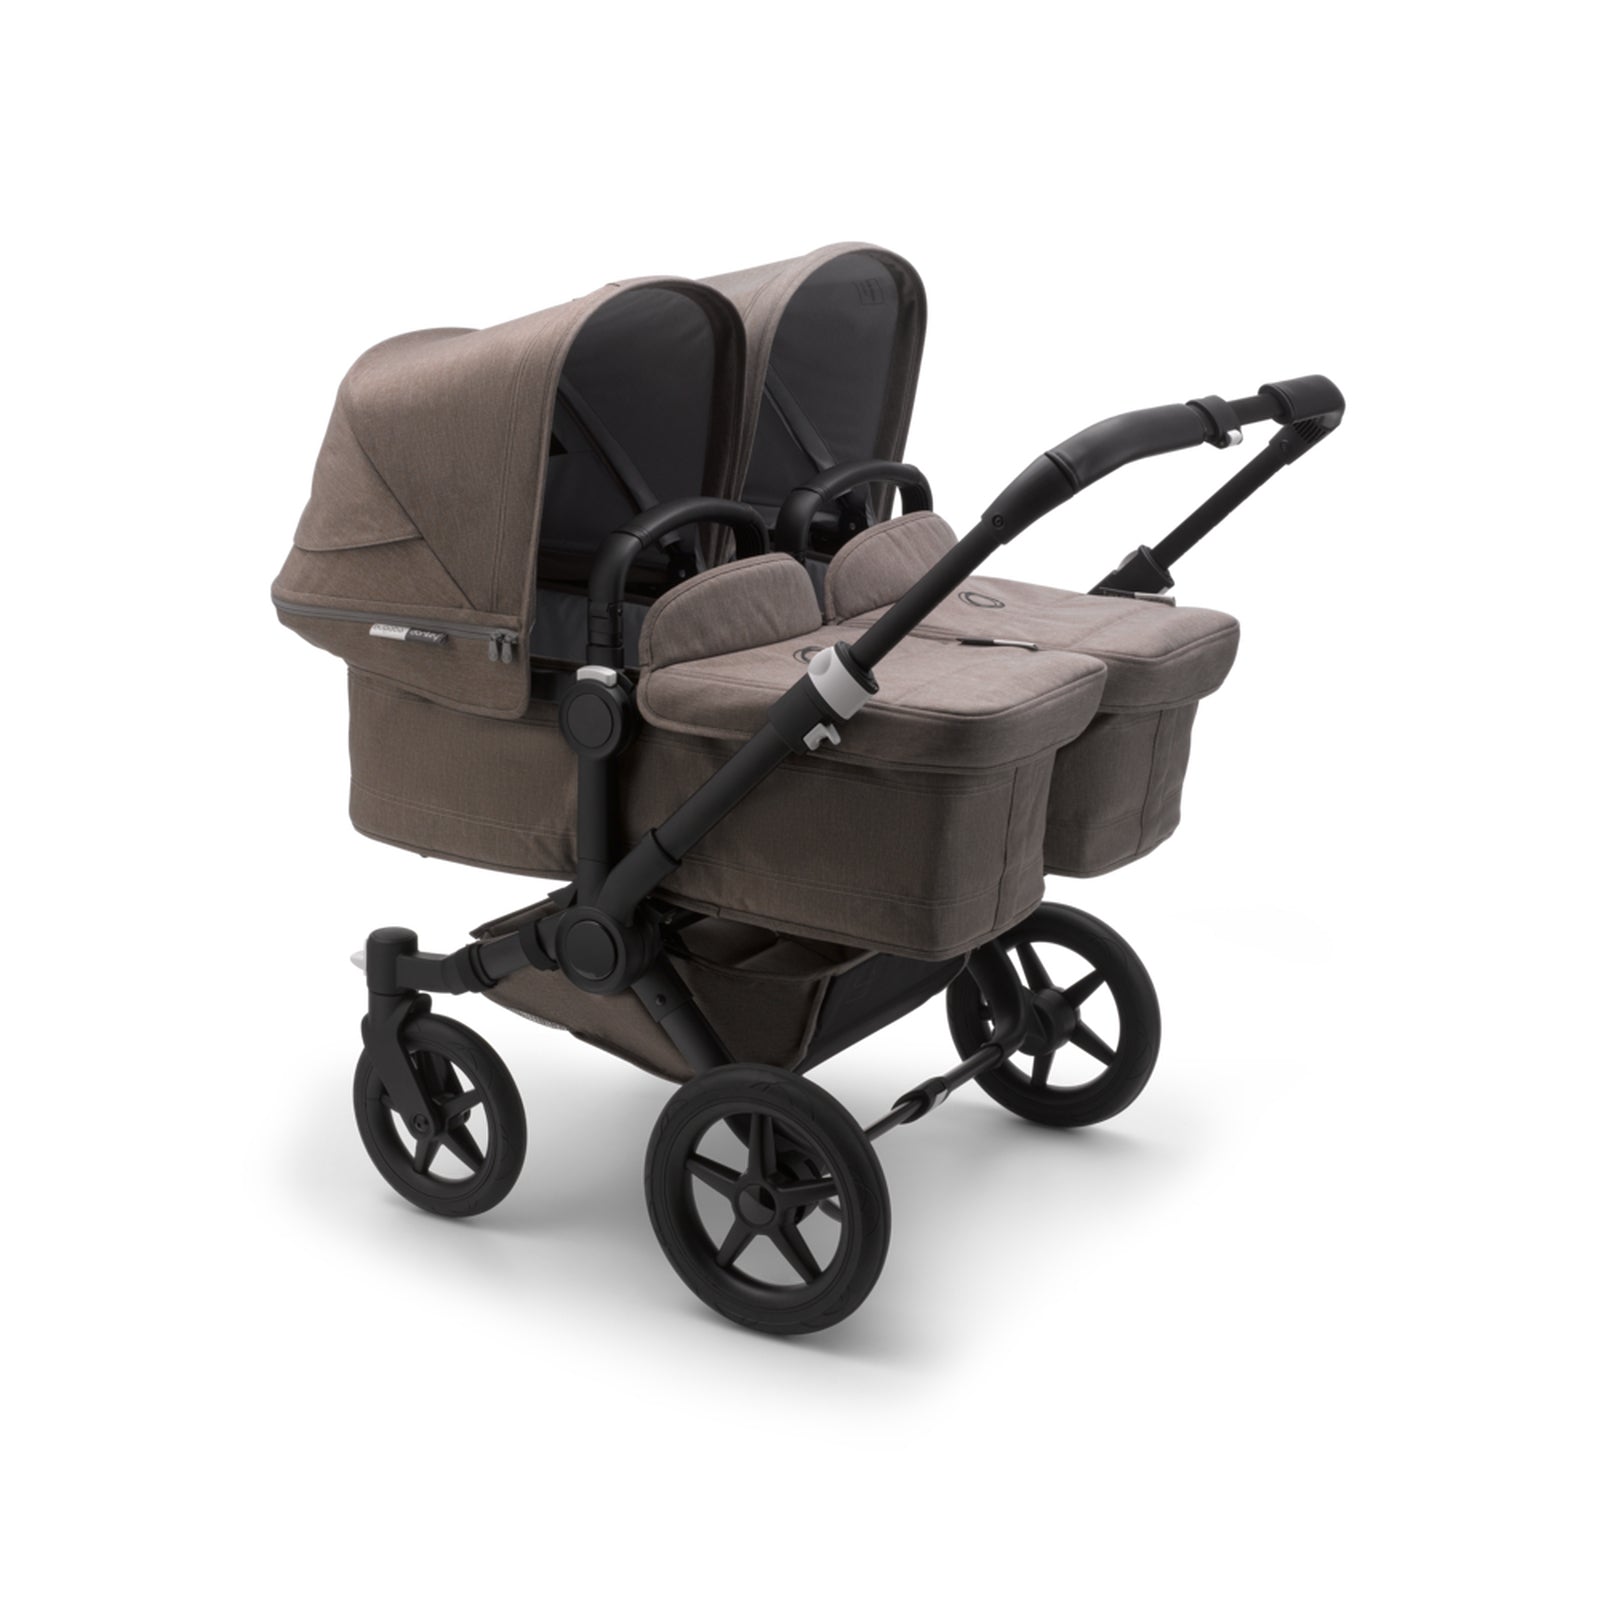 Bugaboo Donkey 3 Twin Seat and Carrycot Pushchair - Mineral Taupe Melange